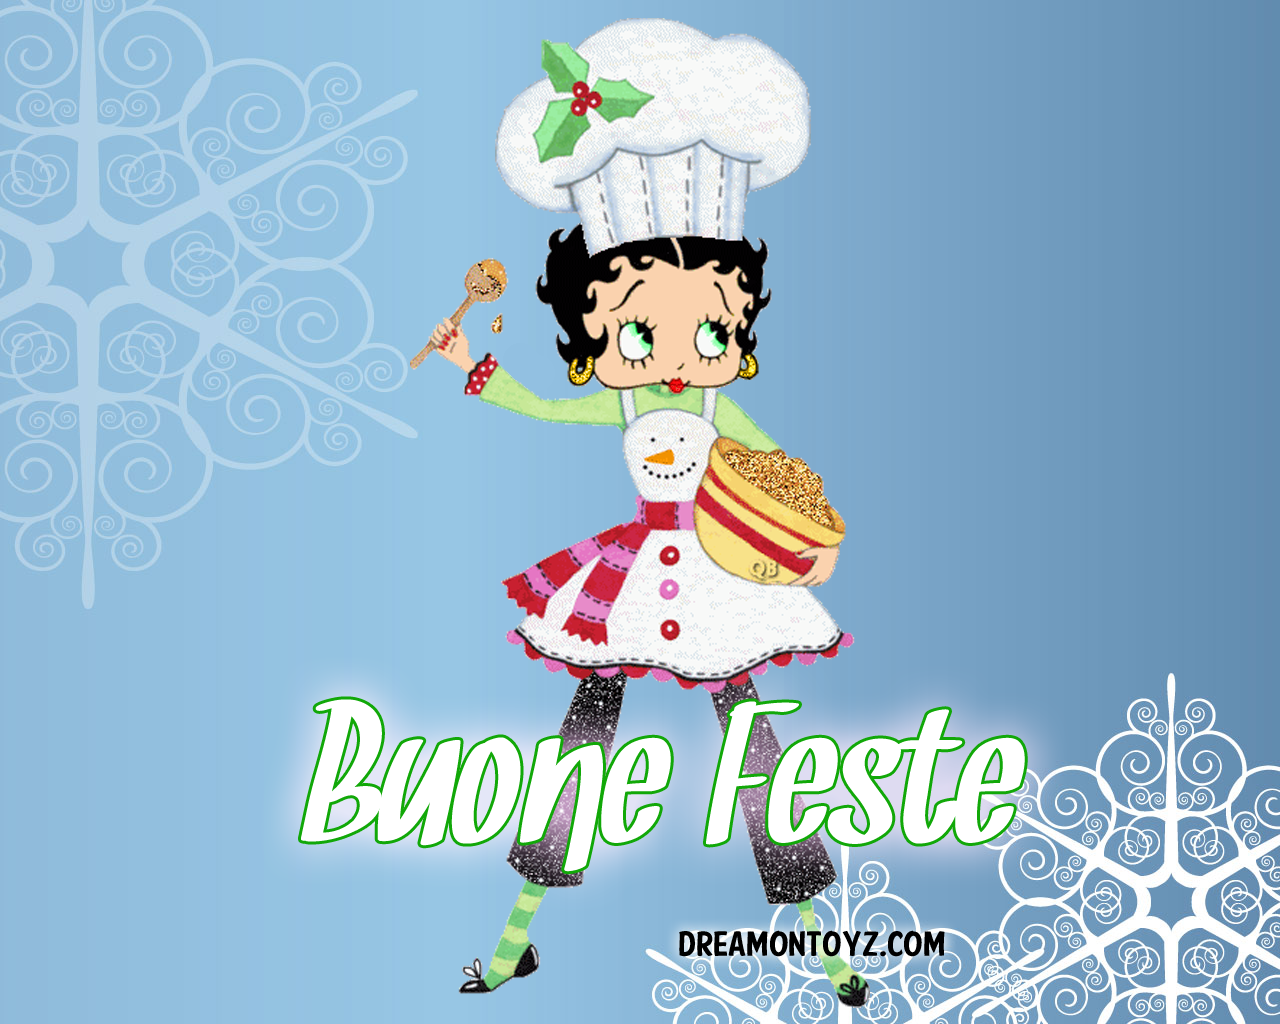 Betty Boop Pictures Archive Holiday Greetings In Italian